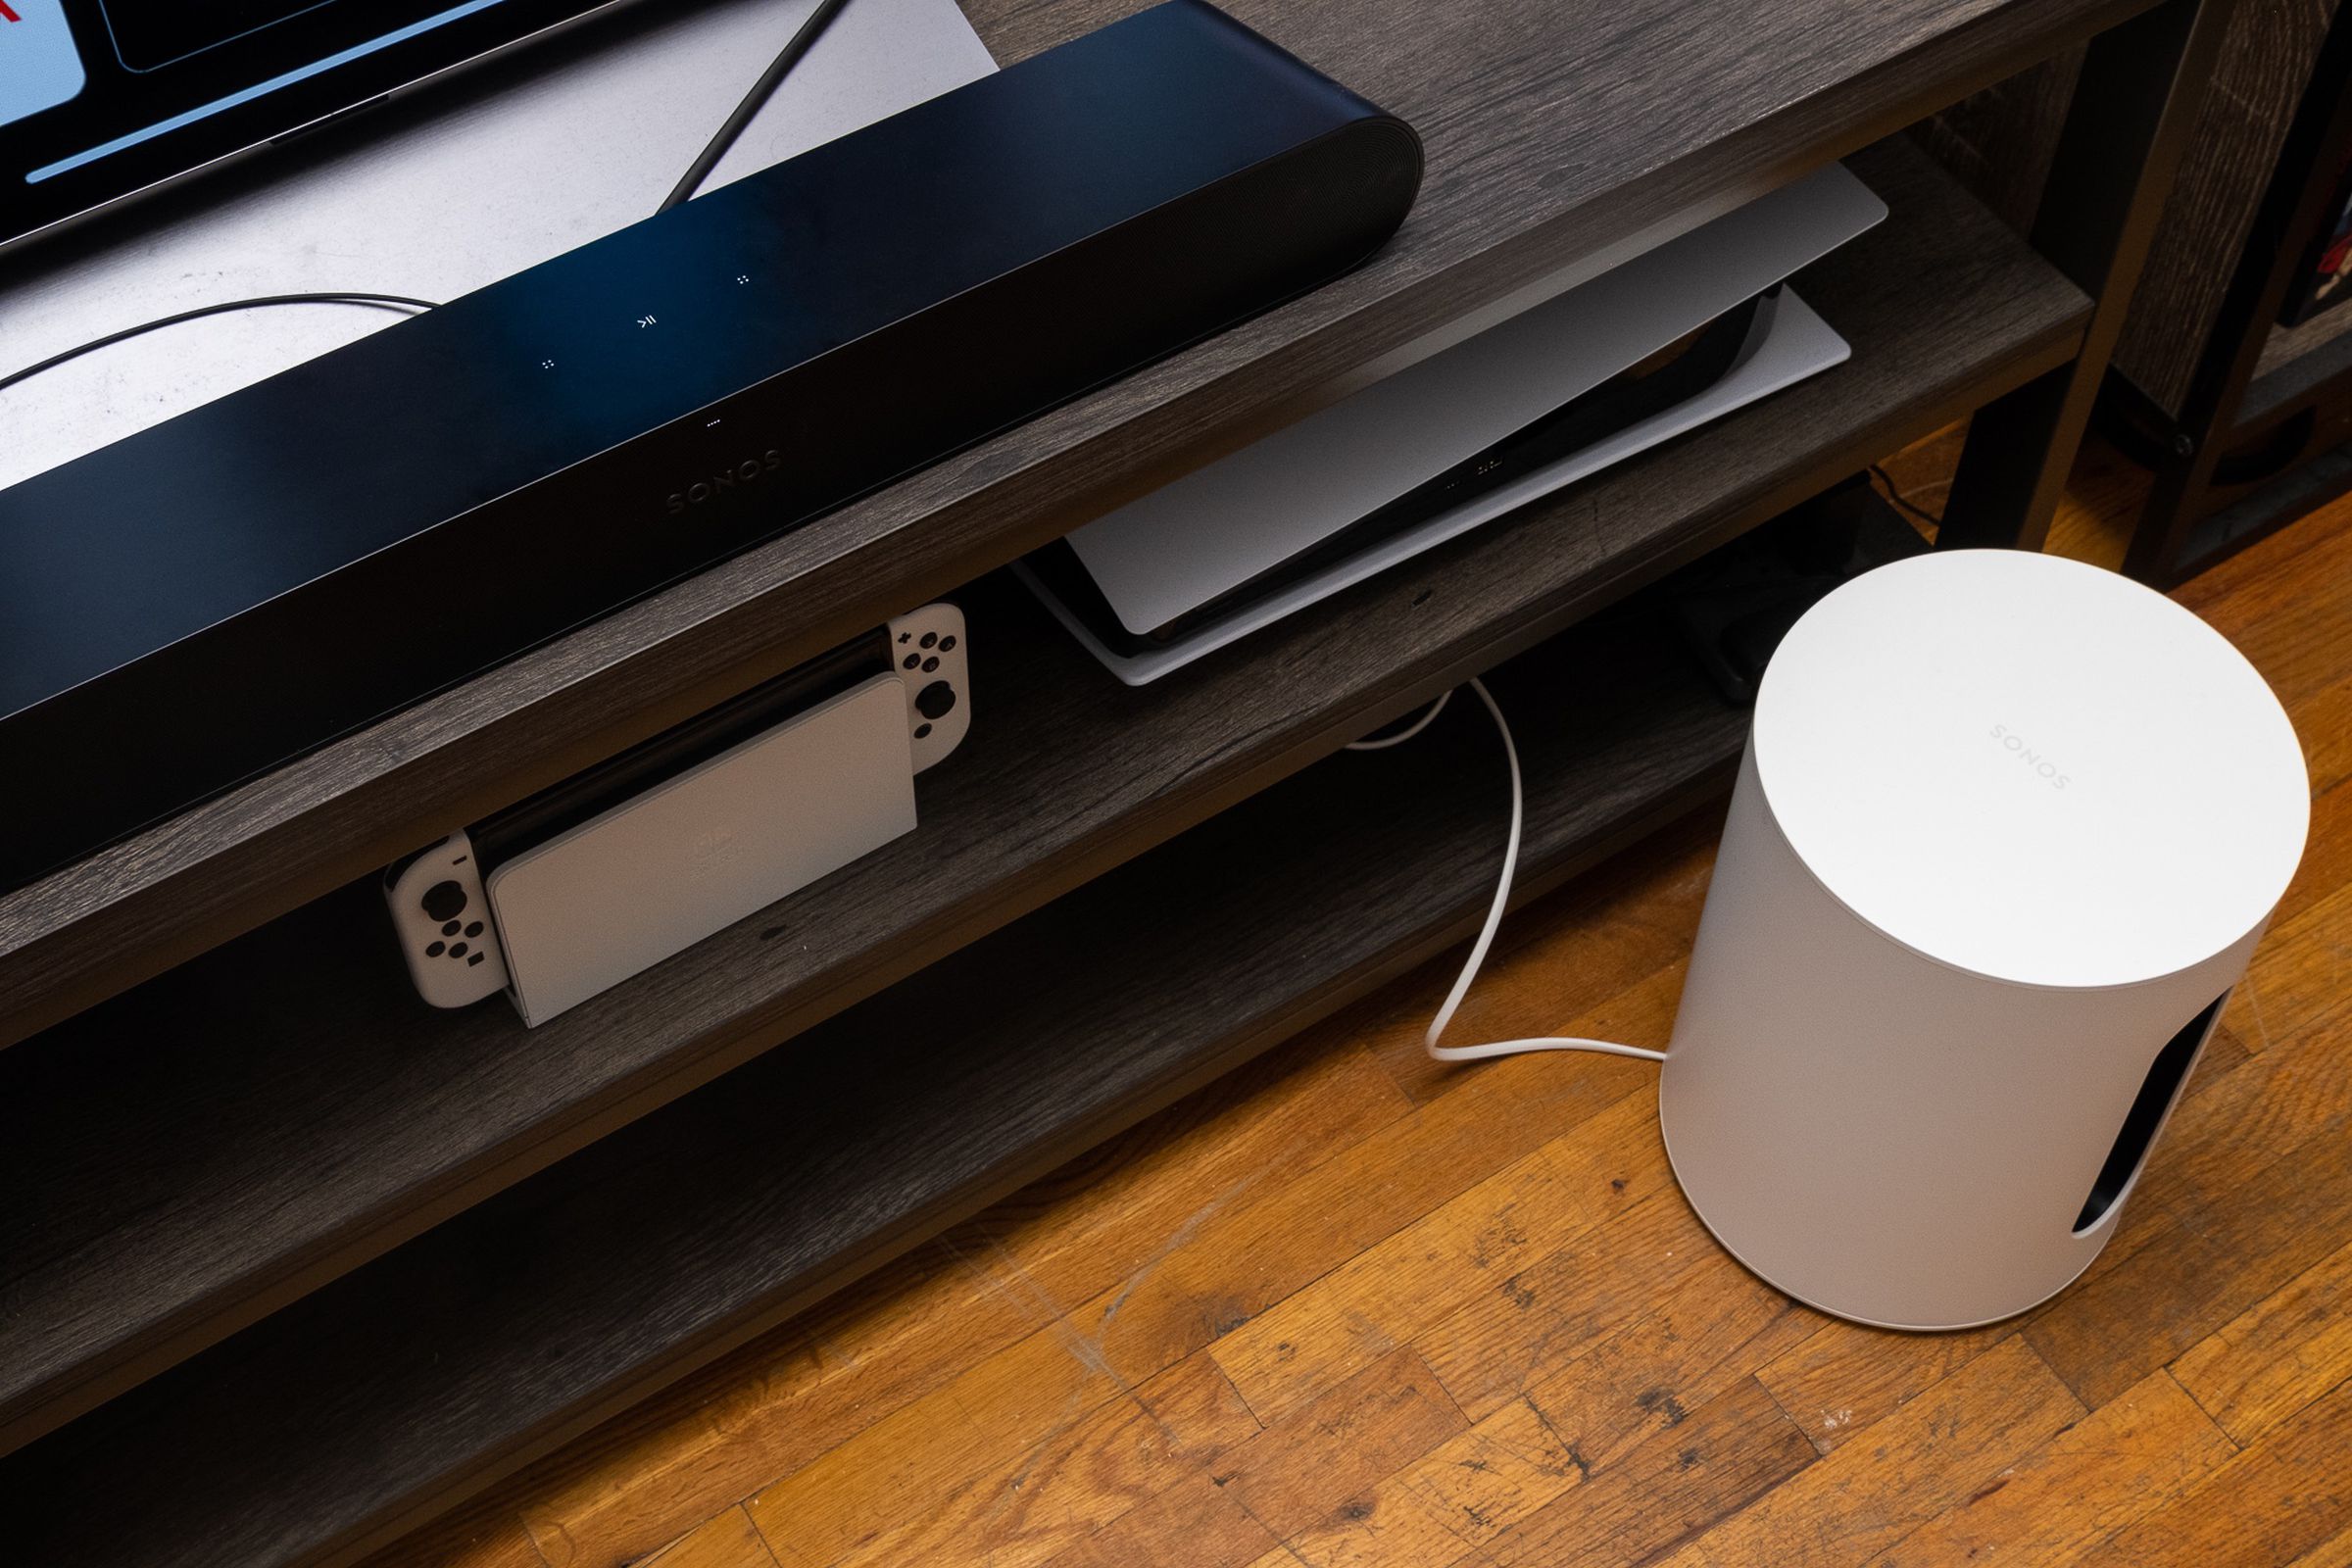 An image of the Sonos Sub Mini subwoofer on the floor near a TV stand with a Sonos Ray soundbar.